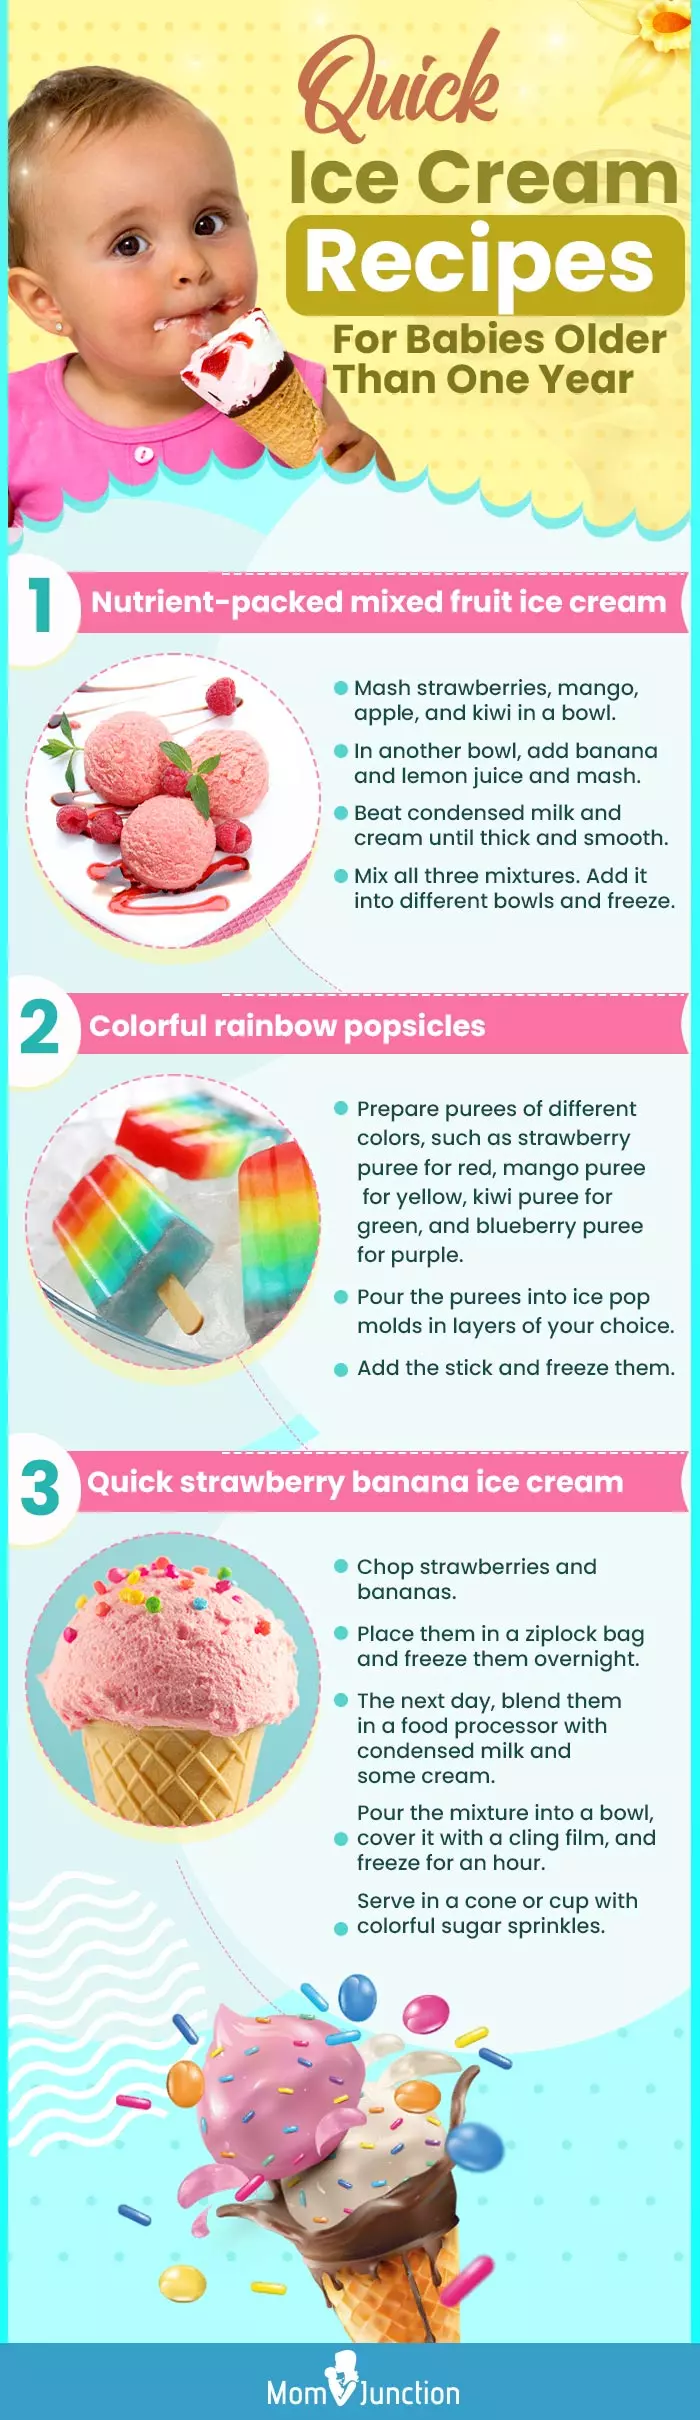 quick ice cream recipes for babies older than one year (infographic)